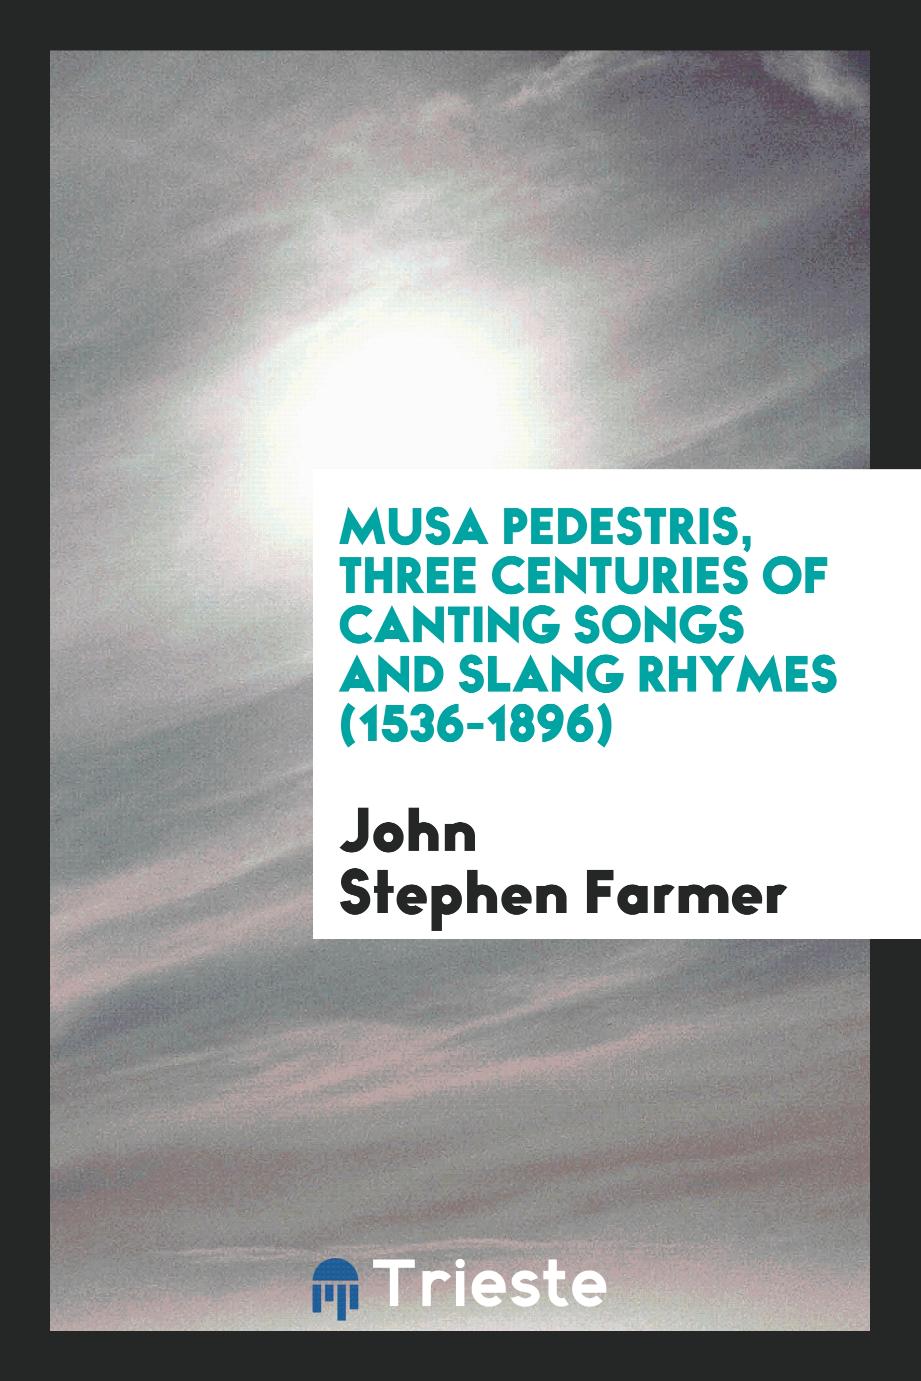 Musa pedestris, three centuries of canting songs and slang rhymes (1536-1896)